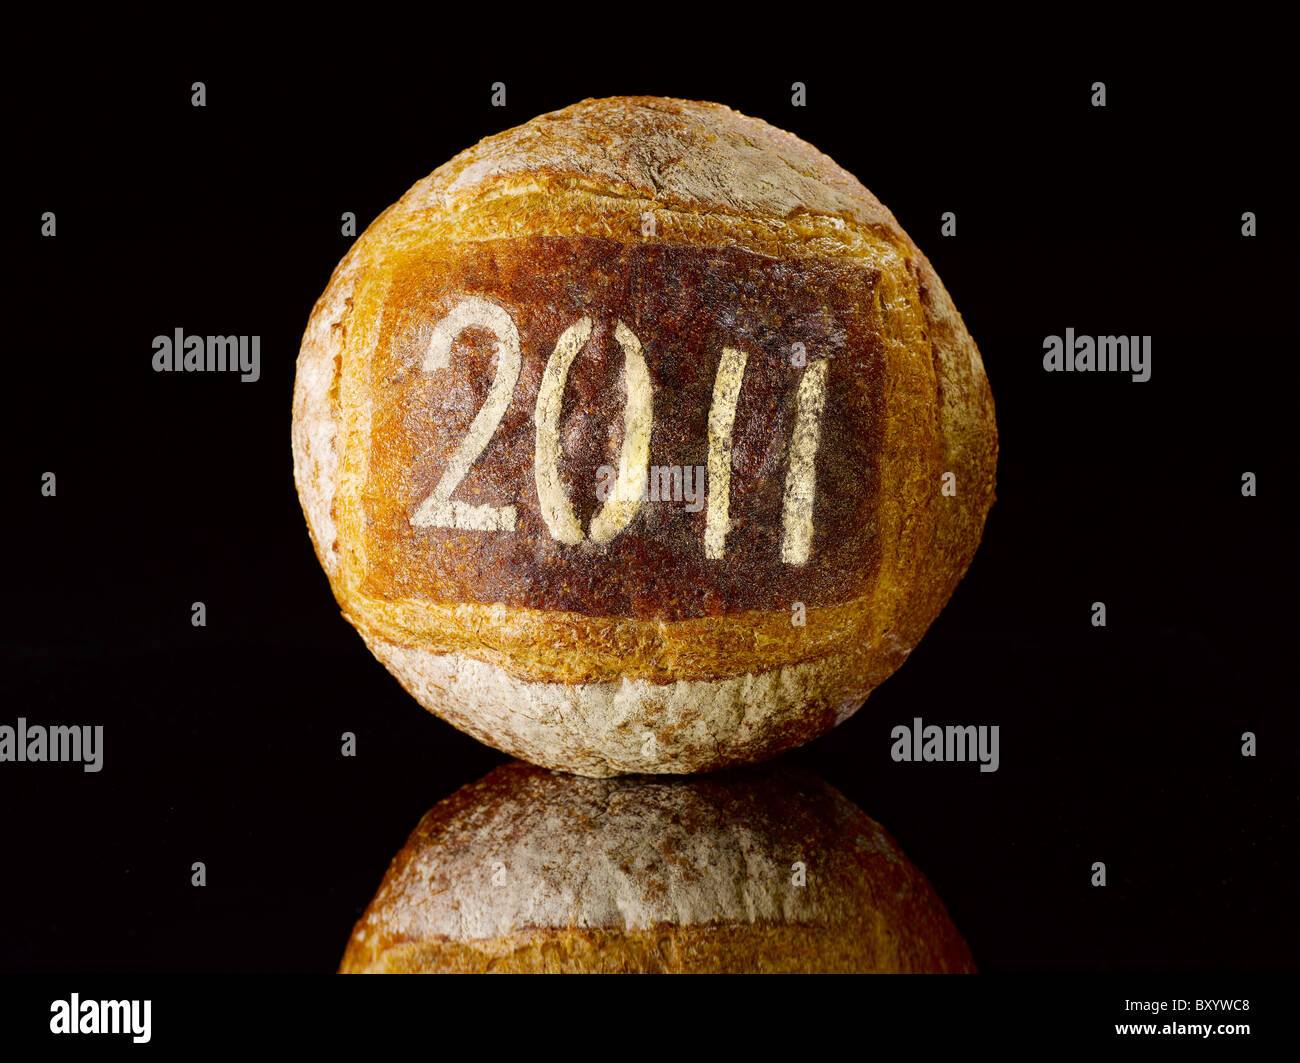 round loaf of bread dusted with the new year date 2011 Stock Photo